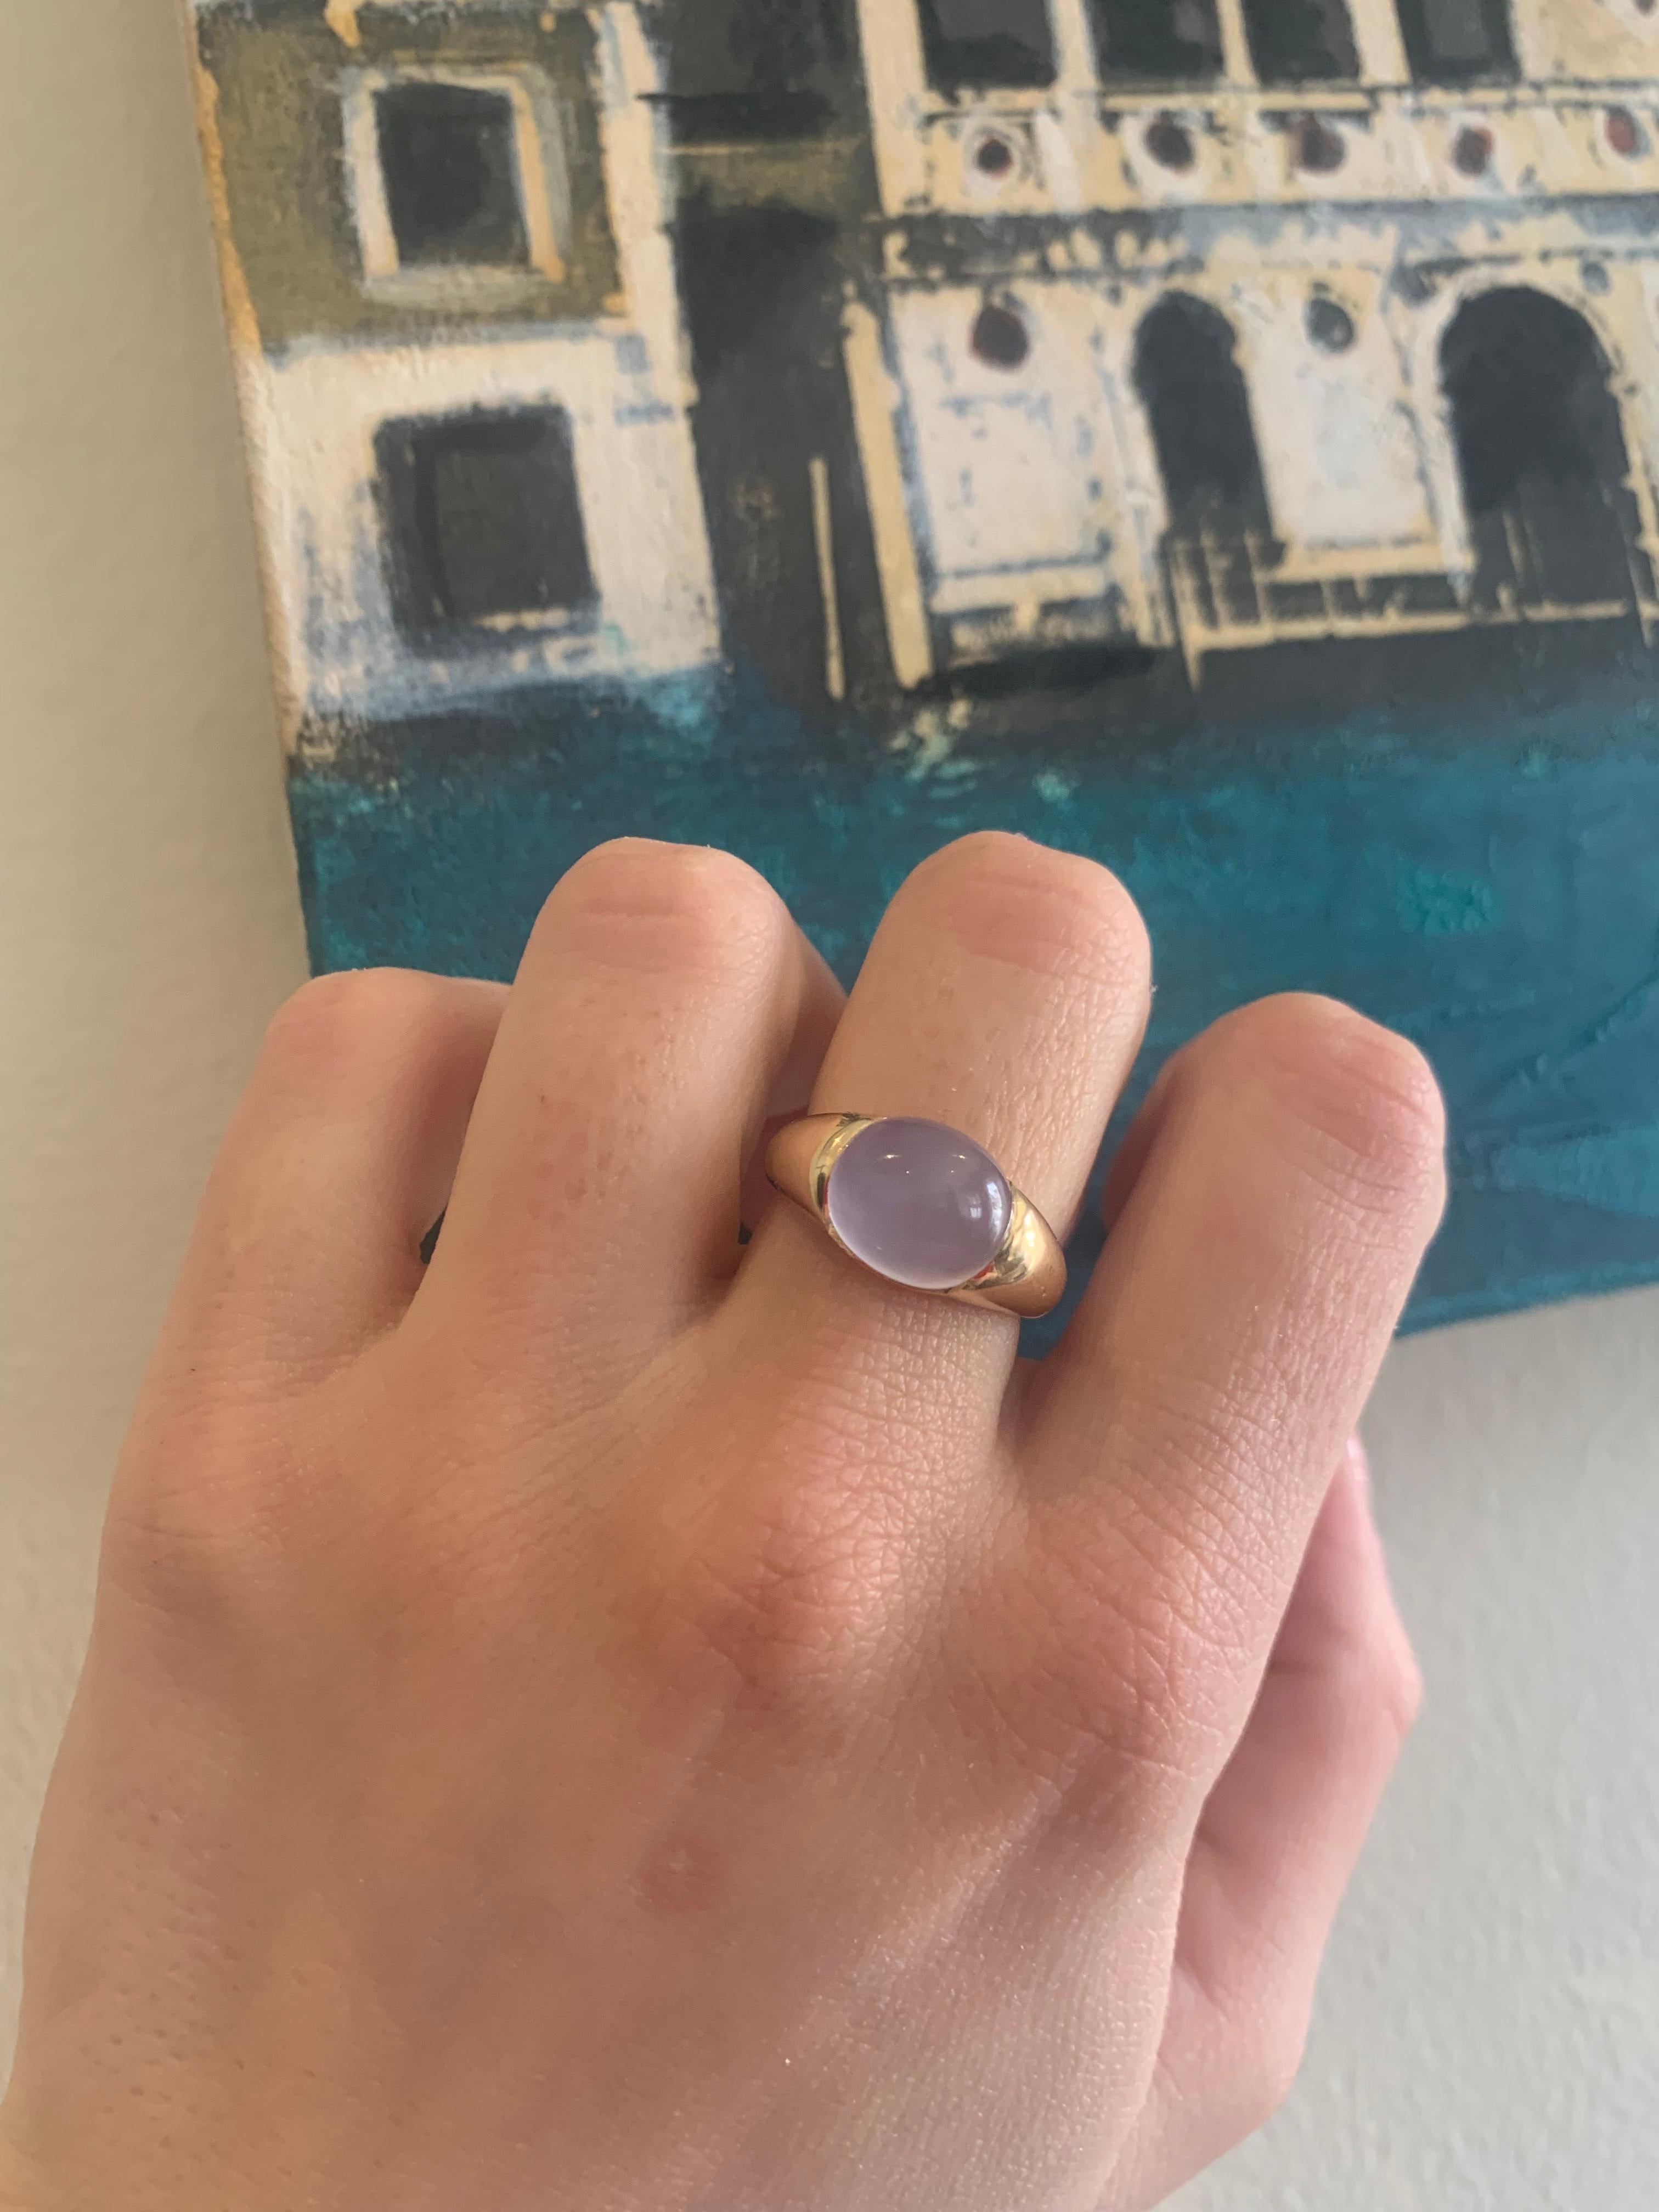 4ct Hand cut Lavender Chalcedony
Set in 18k Rose Gold
Made to order in any size
Video shown is the ring in Lavender Chalcedony set in 18k Yellow Gold

Handcrafted in our 150 year old workshop South of Rome, this ring may be simple in design but